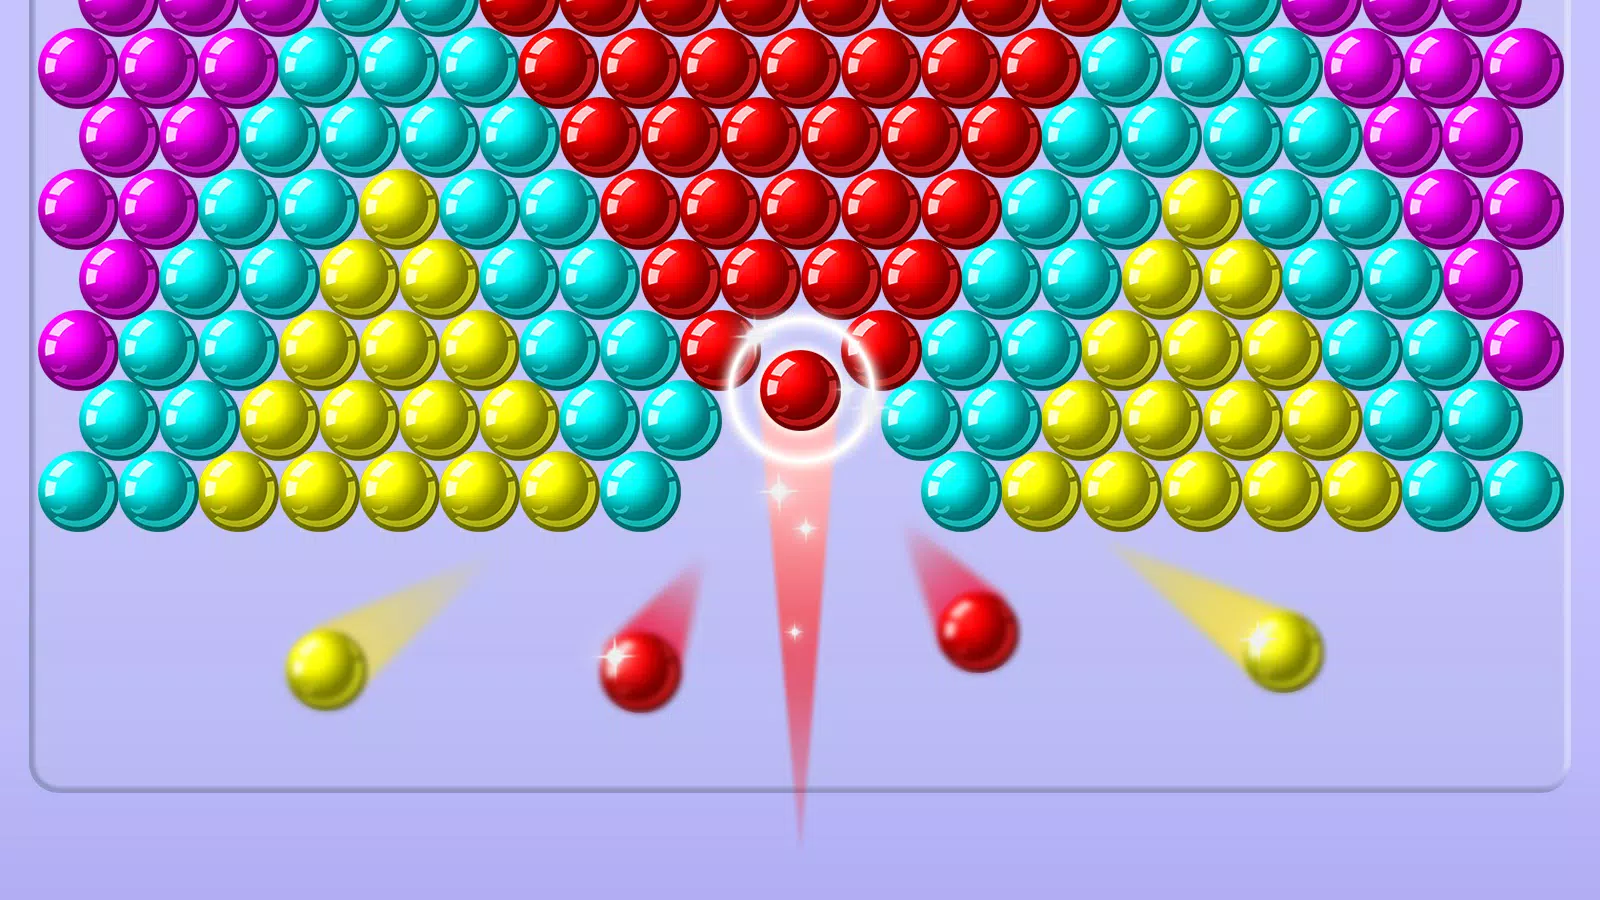 Download Bubble Shooter free for Android APK - CCM